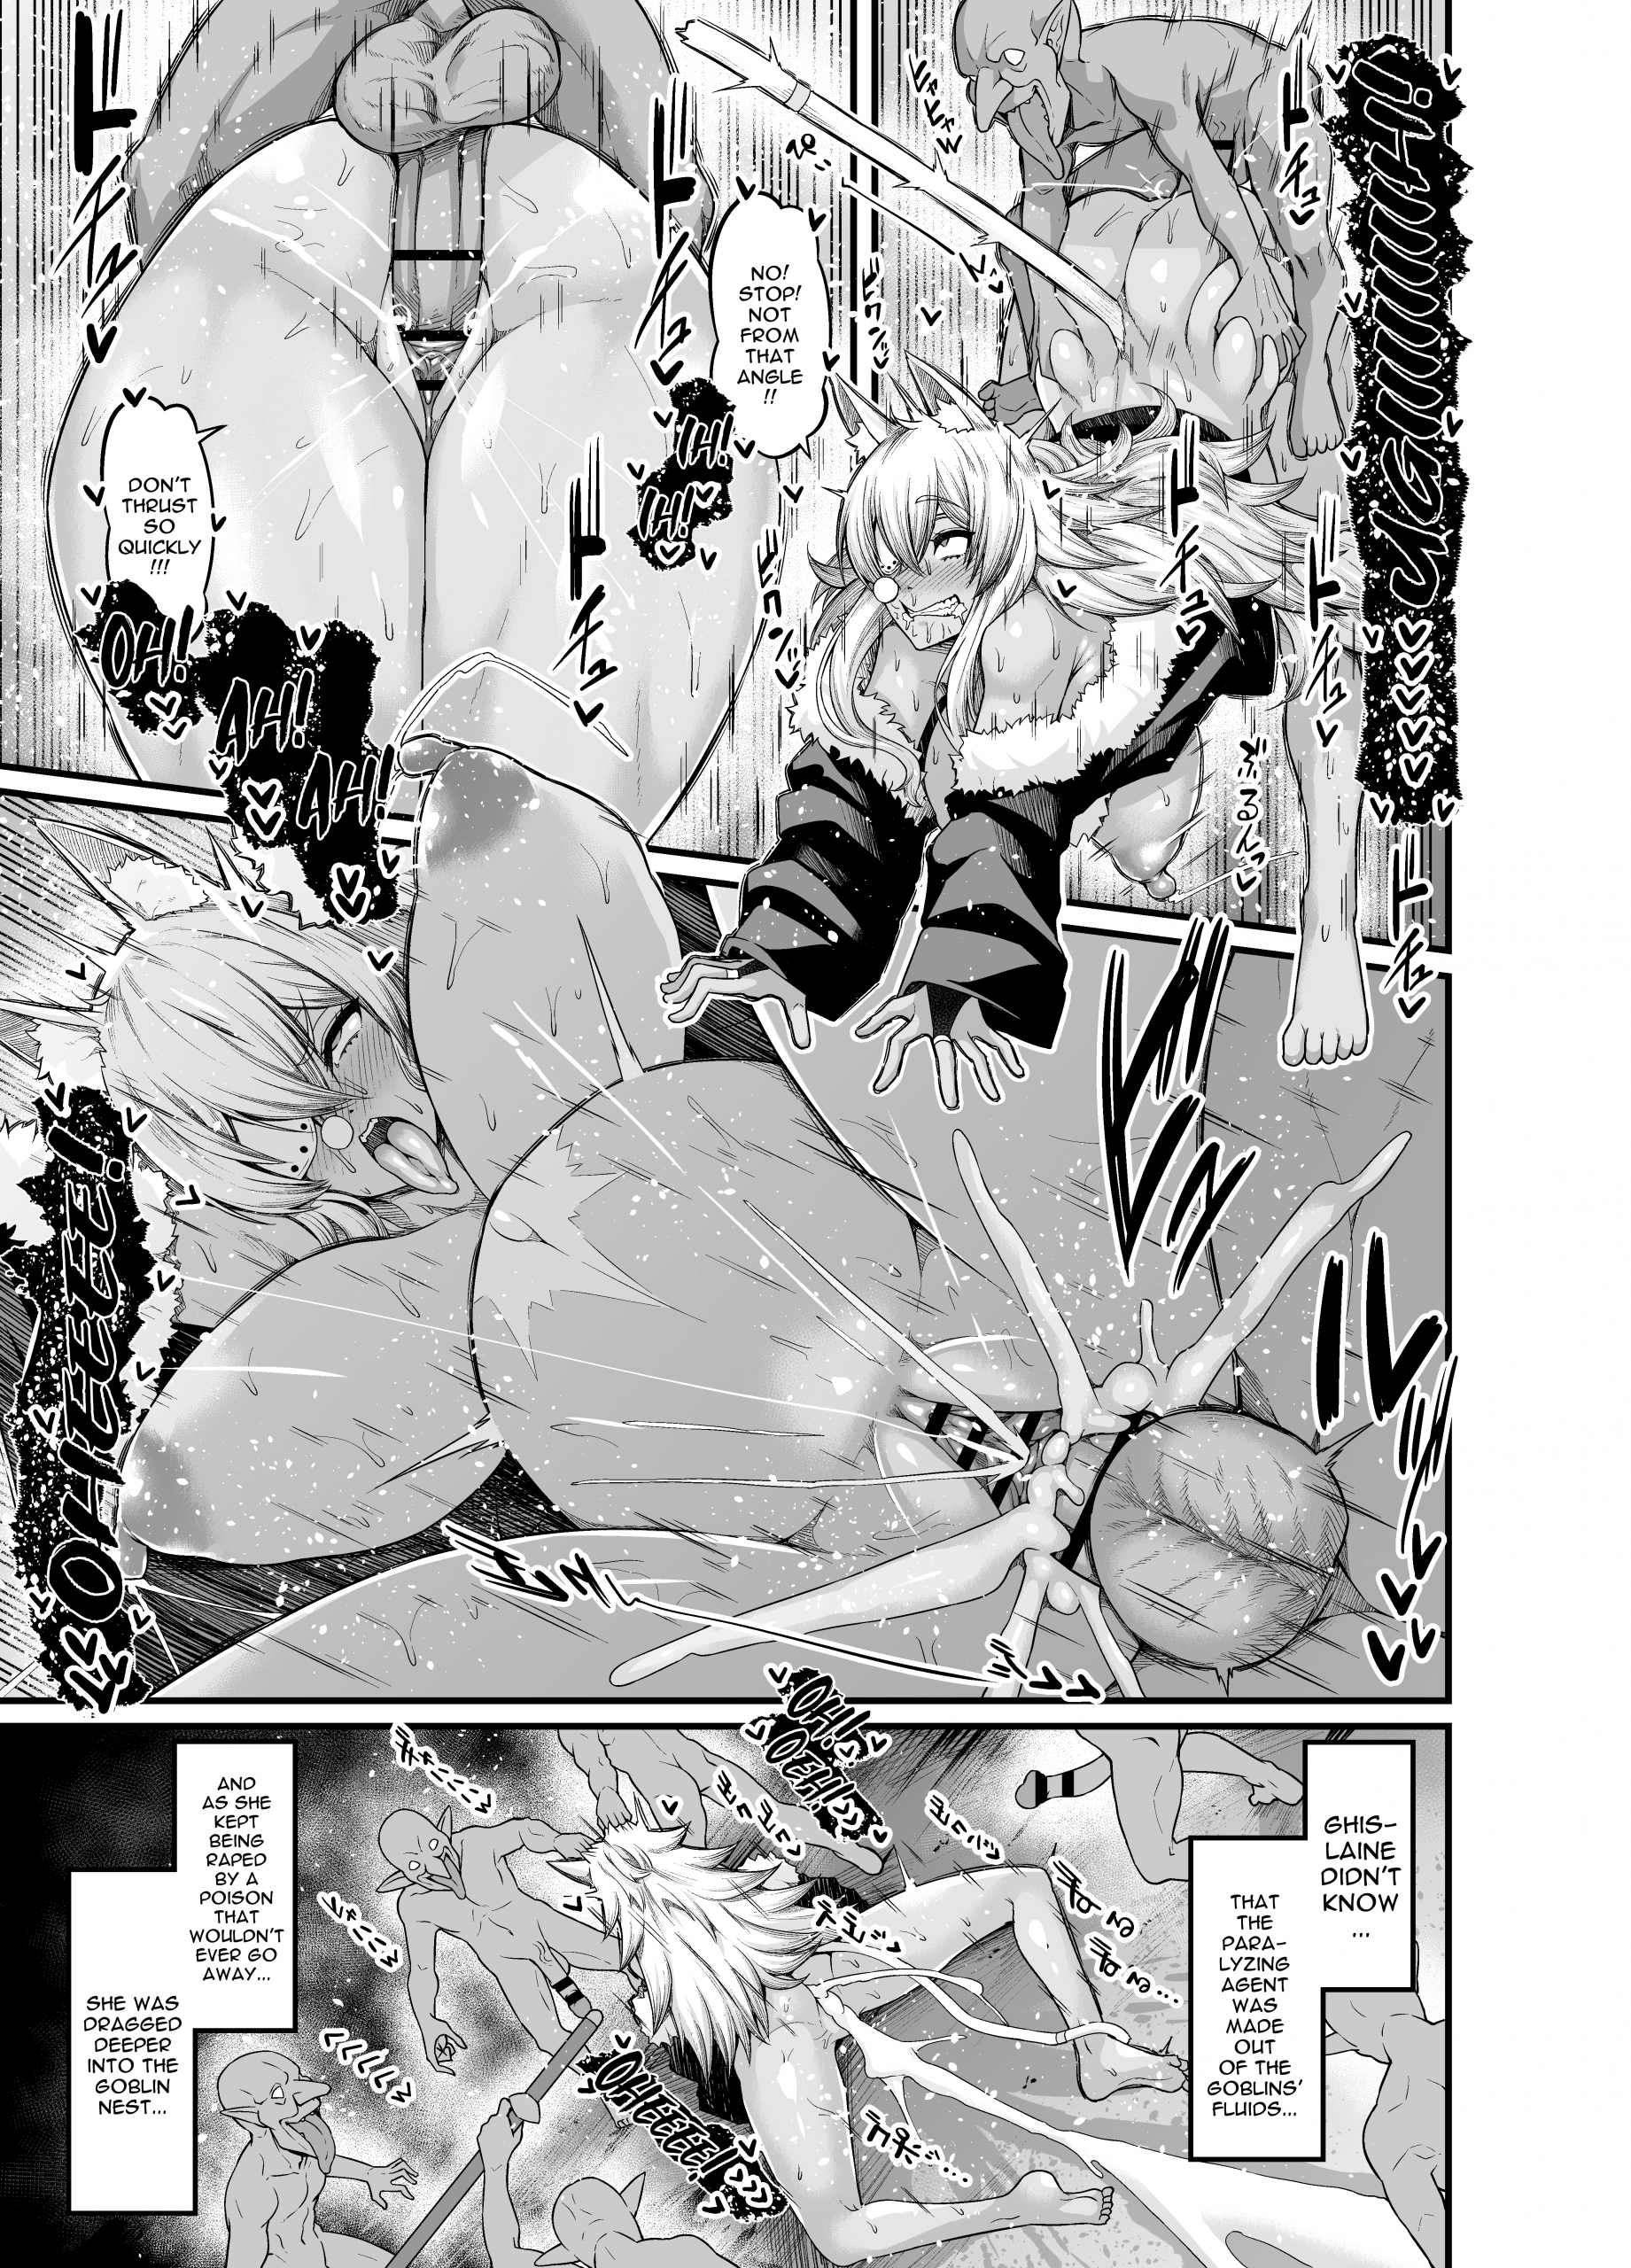 Going Out To Hunt Goblins hentai manga picture 4